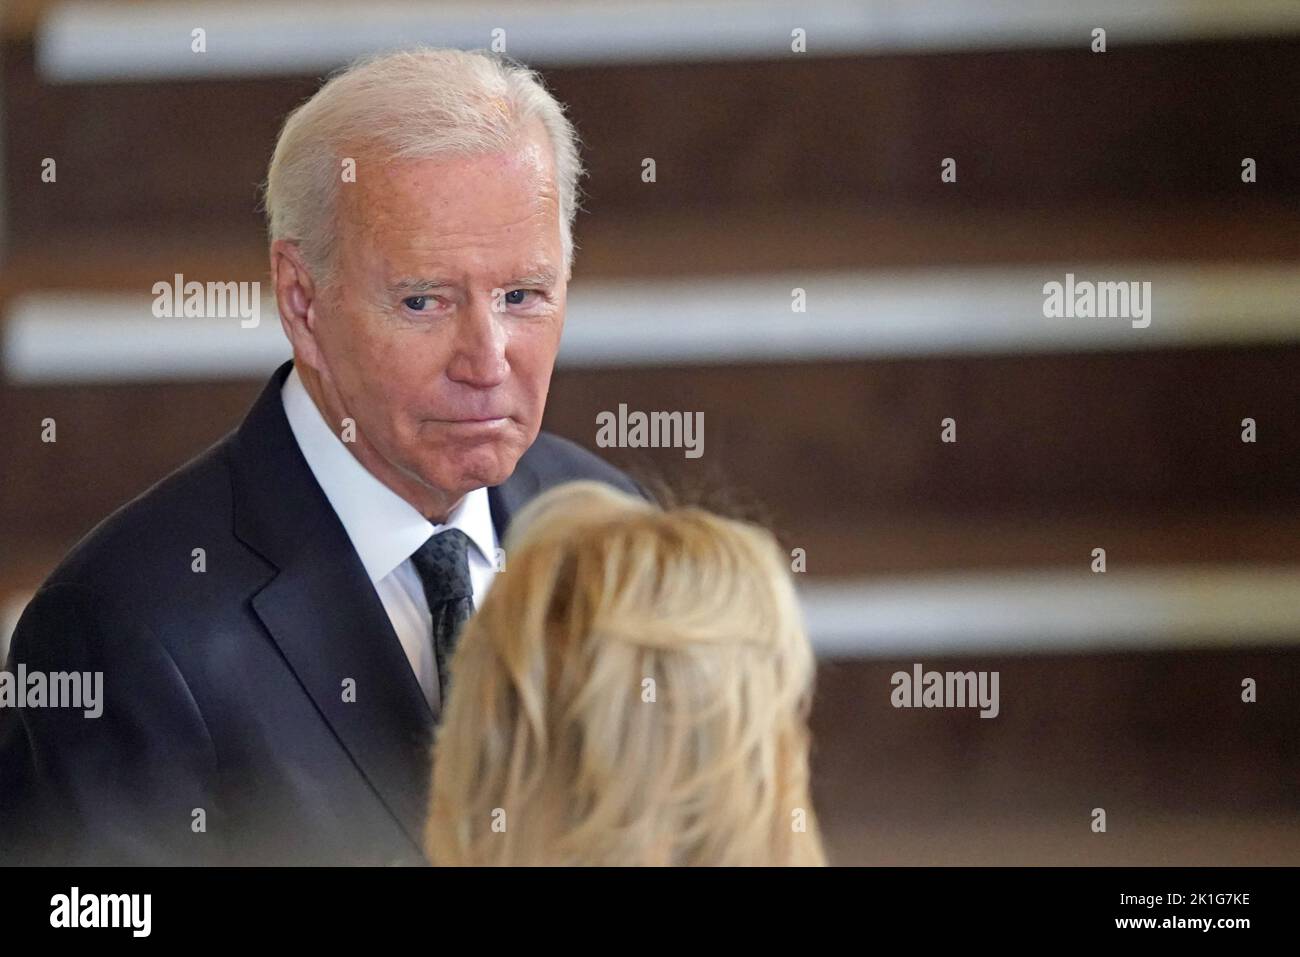 US President Joe Biden and First Lady Jill Biden view the coffin of Queen Elizabeth II, lying in state on the catafalque in Westminster Hall, at the Palace of Westminster, London, ahead of her funeral on Monday. Picture date: Sunday September 18, 2022. Stock Photo